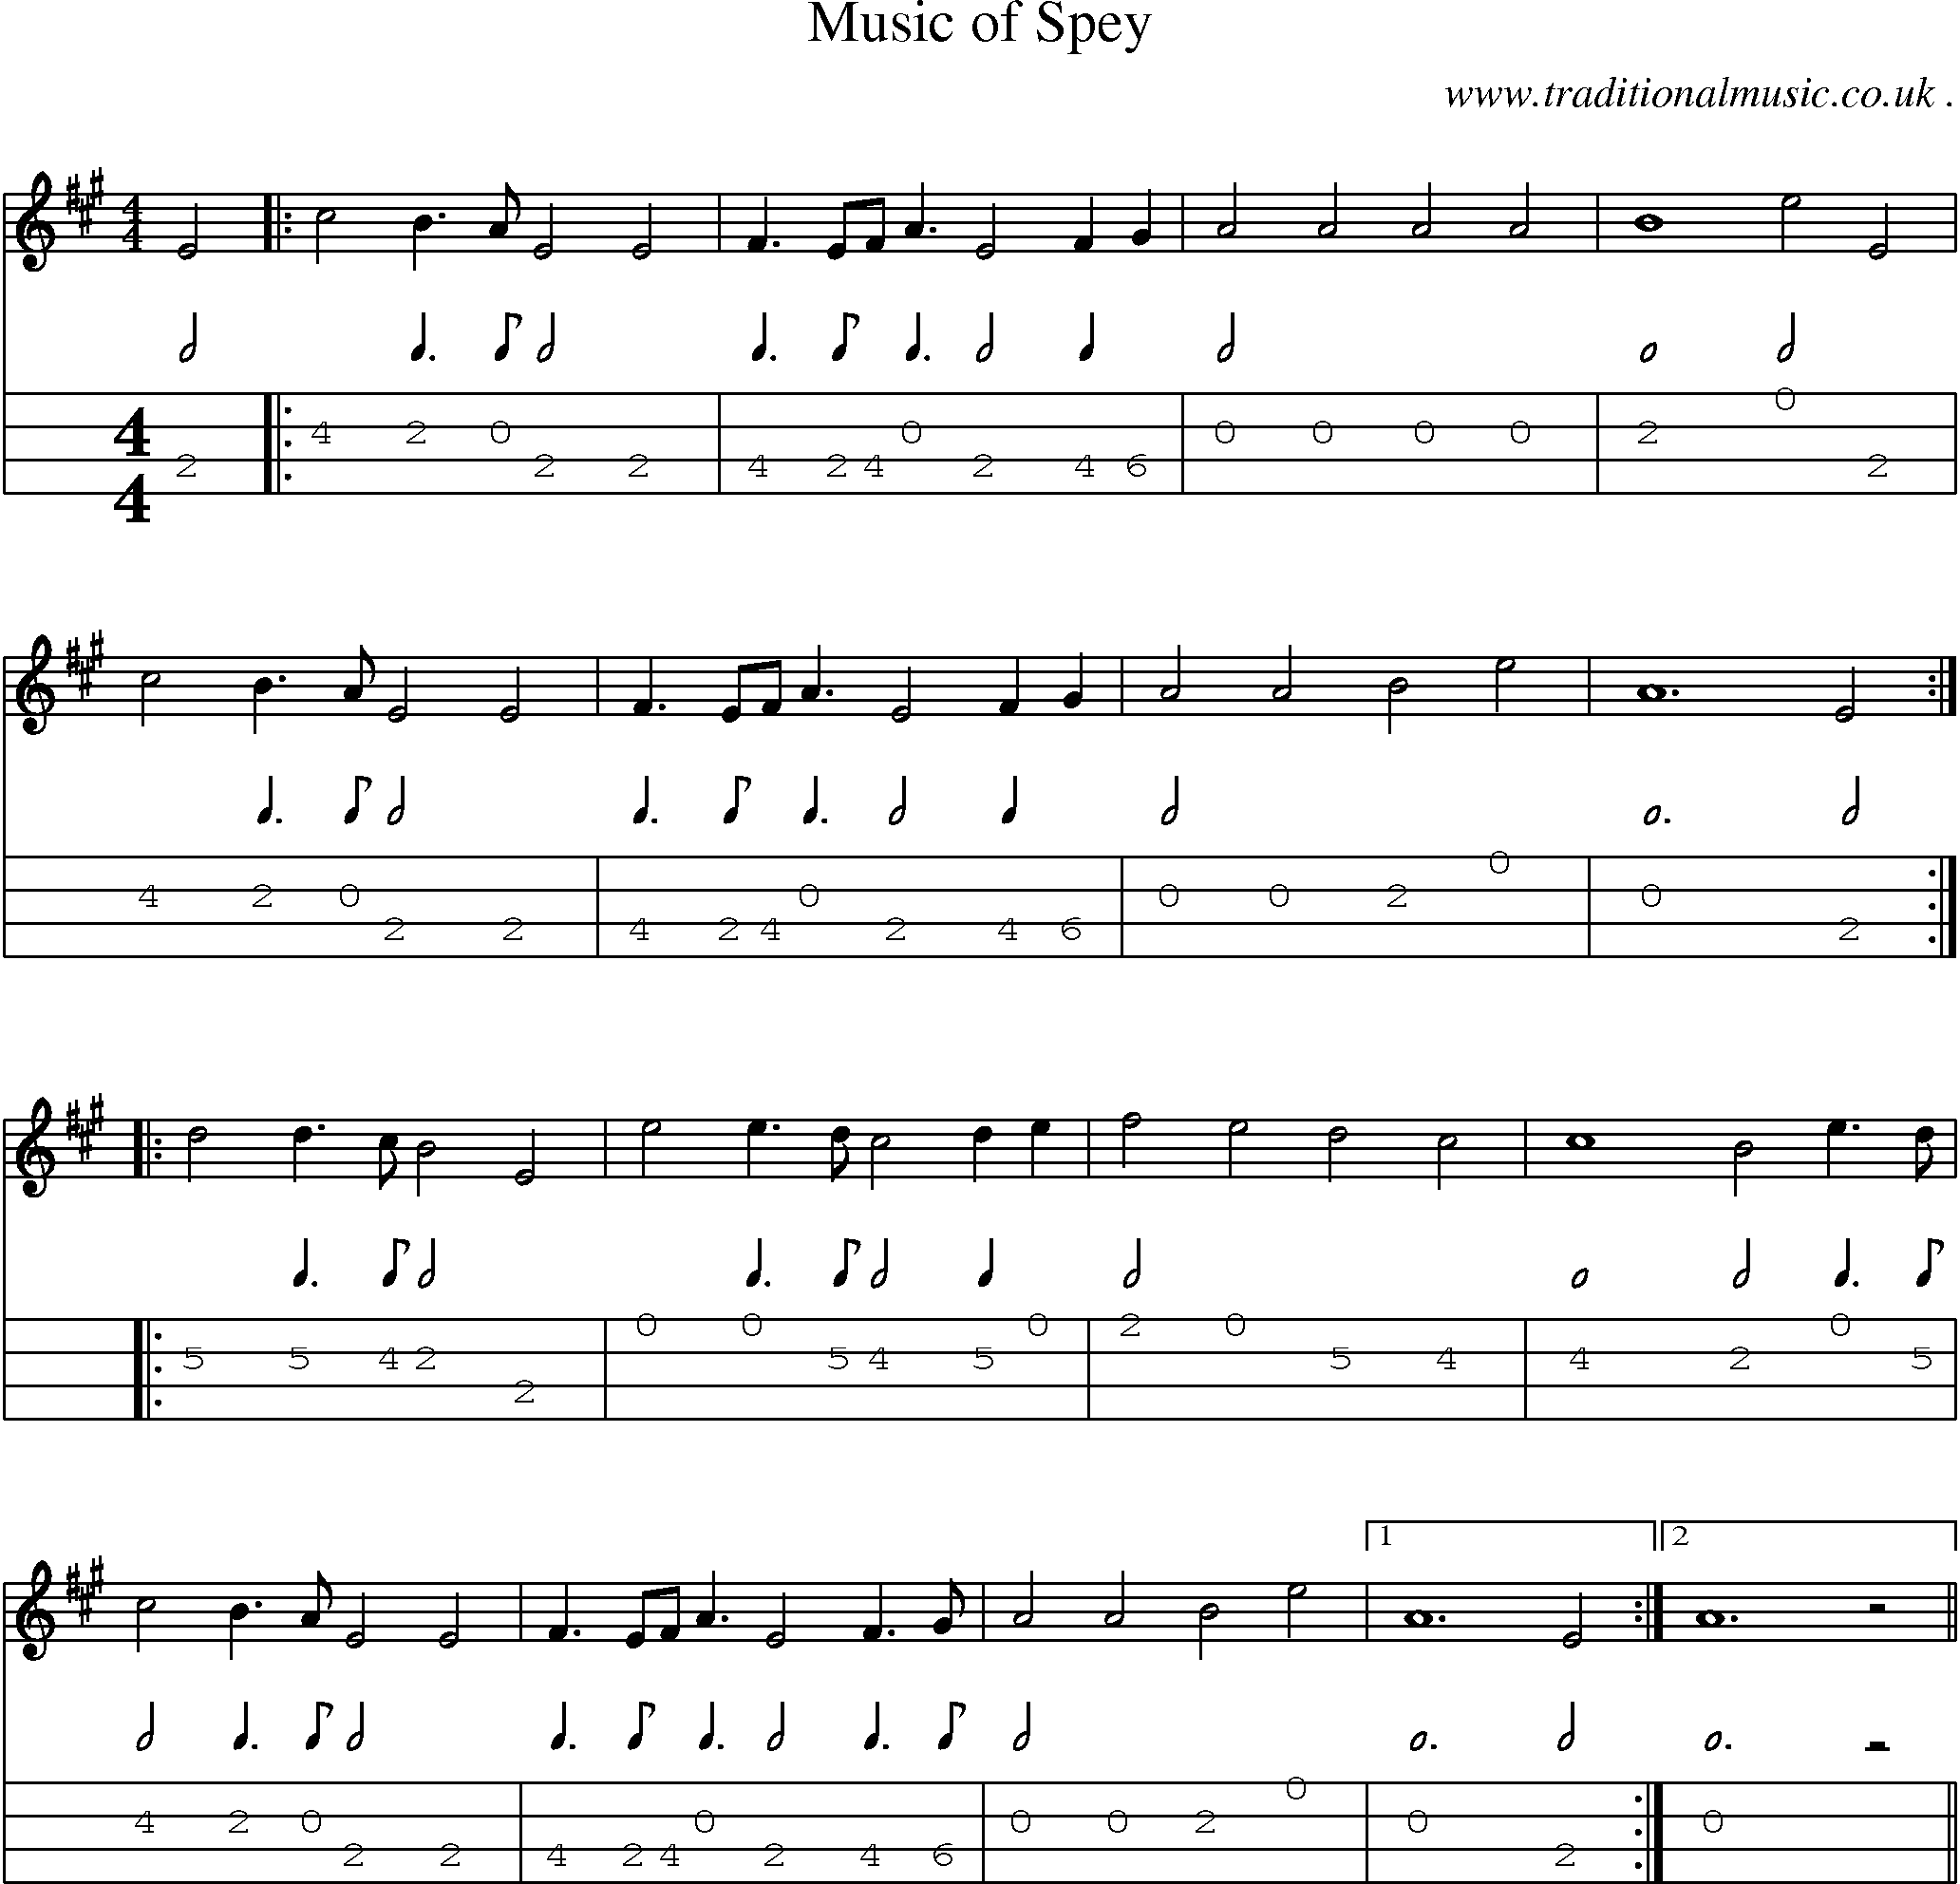 Sheet-music  score, Chords and Mandolin Tabs for Music Of Spey